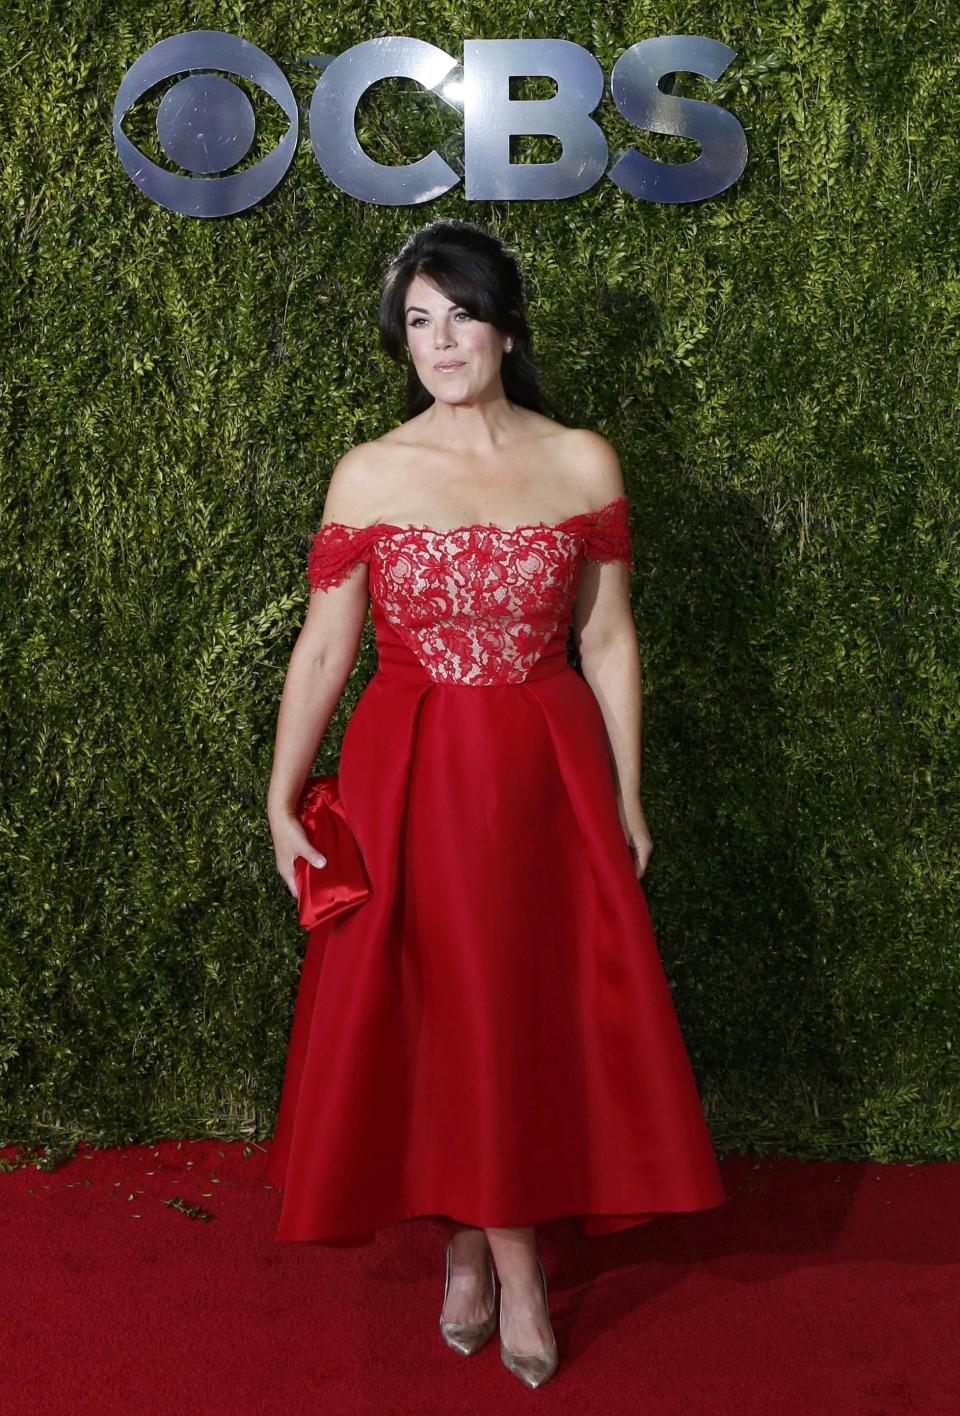 Monica Lewinsky arrives for the American Theatre Wing's 69th Annual Tony Awards at the Radio City Music Hall in Manhattan